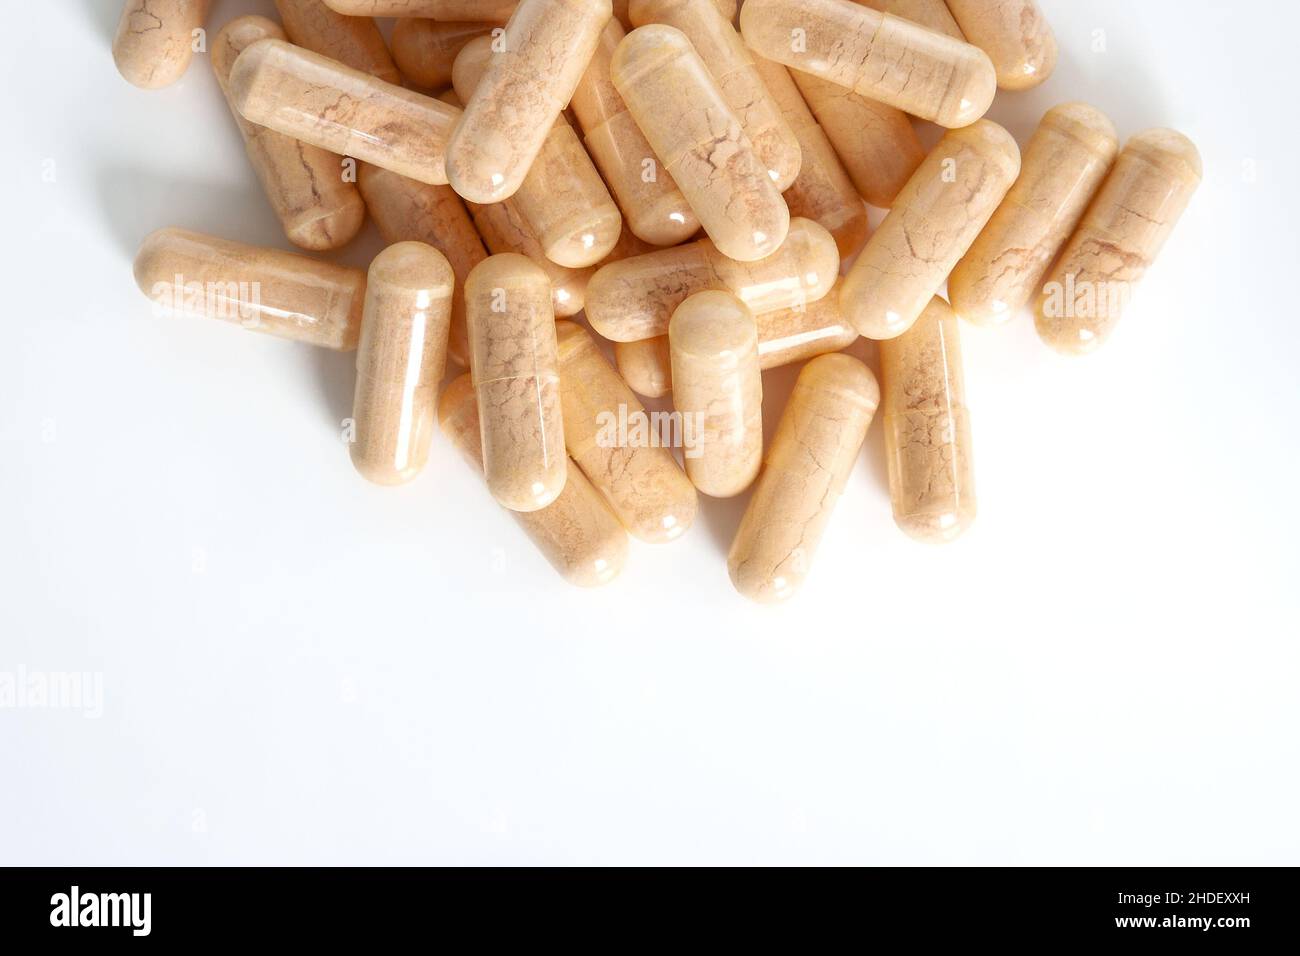 Detail of orange multivitamin supplements isolated on white background. Stock Photo